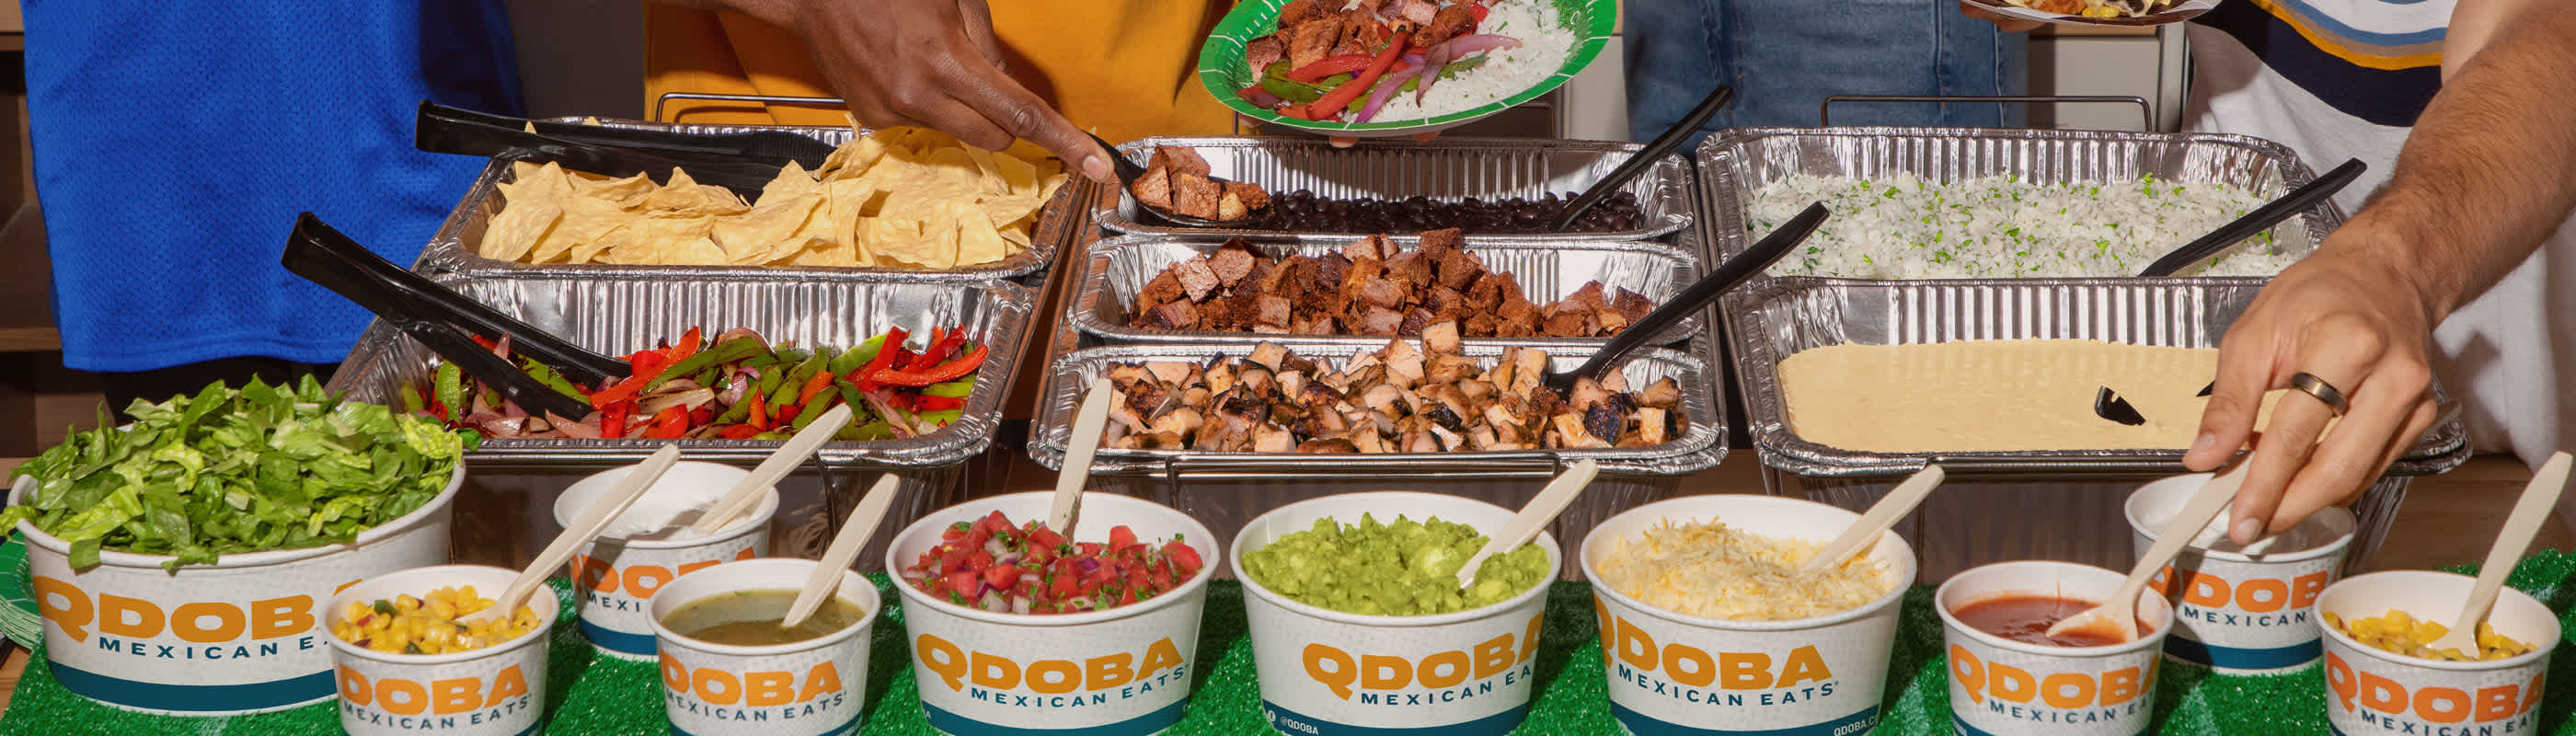 QDOBA Catering spread featuring grilled adobo chicken, tender steak, creamy 3-cheese queso, fresh hand-crafted guacamole, fajita veggies, vibrant pico de gallo, assorted salsas, and a variety of other fresh toppings ready for a festive game day party.